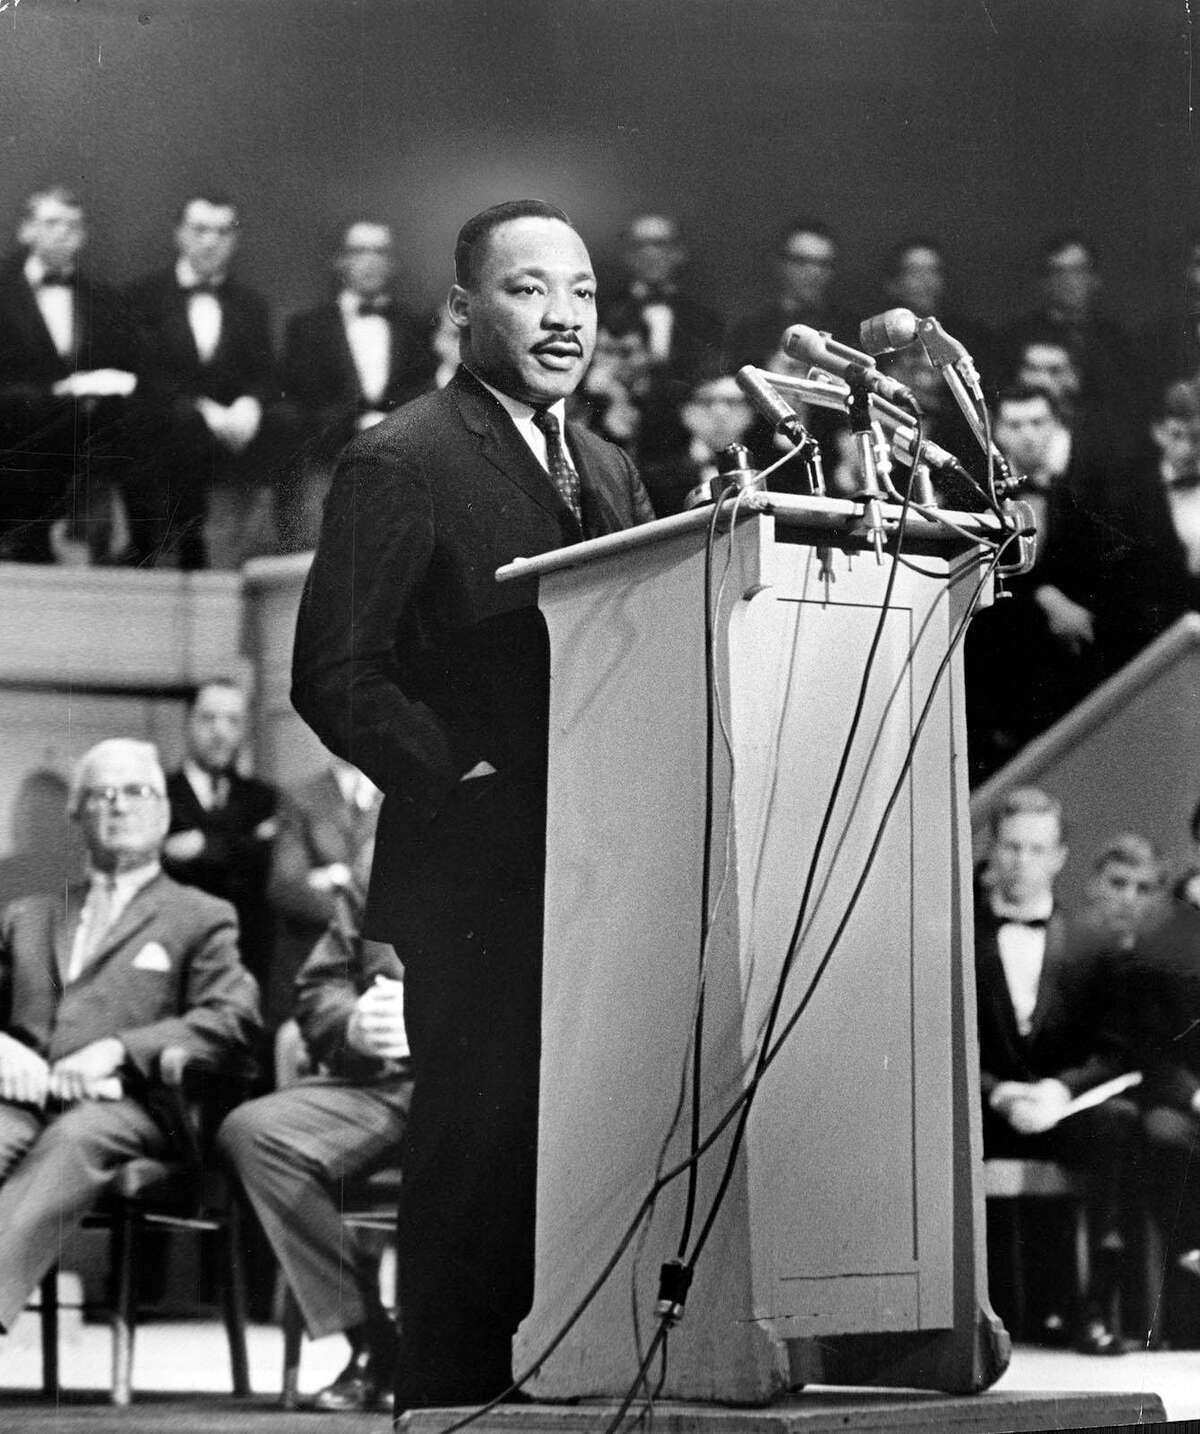 The Rev. Dr. Martin Luther King Jr. addresses the Sunday Evening Club at Orchestra Hall in Chicago on March 14, 1965.